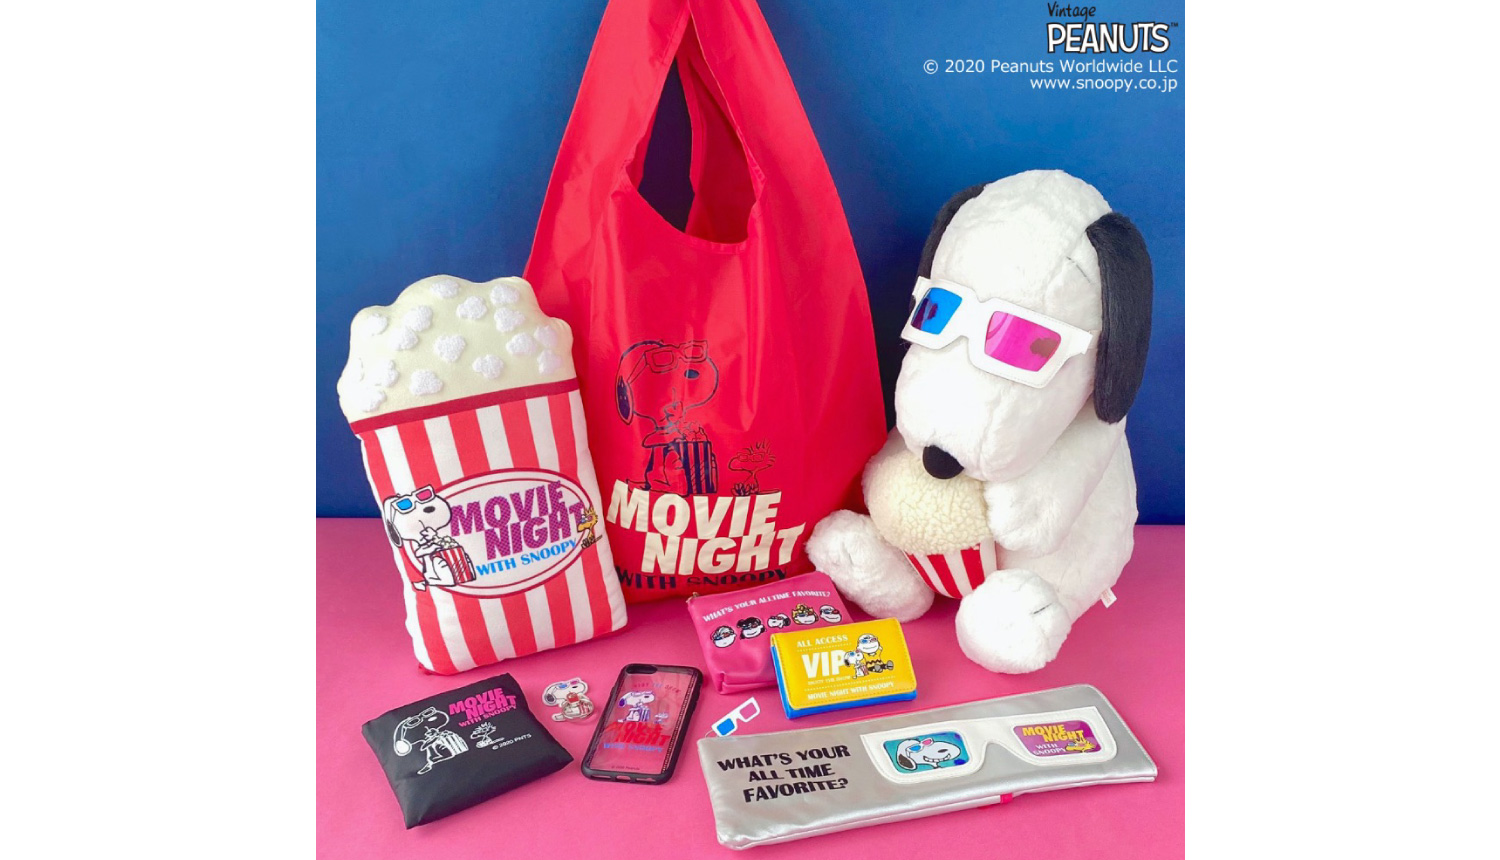 MOVIE-NIGHT-WITH-SNOOPY-ムービーナイト-ウィズ-スヌーピー-史努比-電影夜